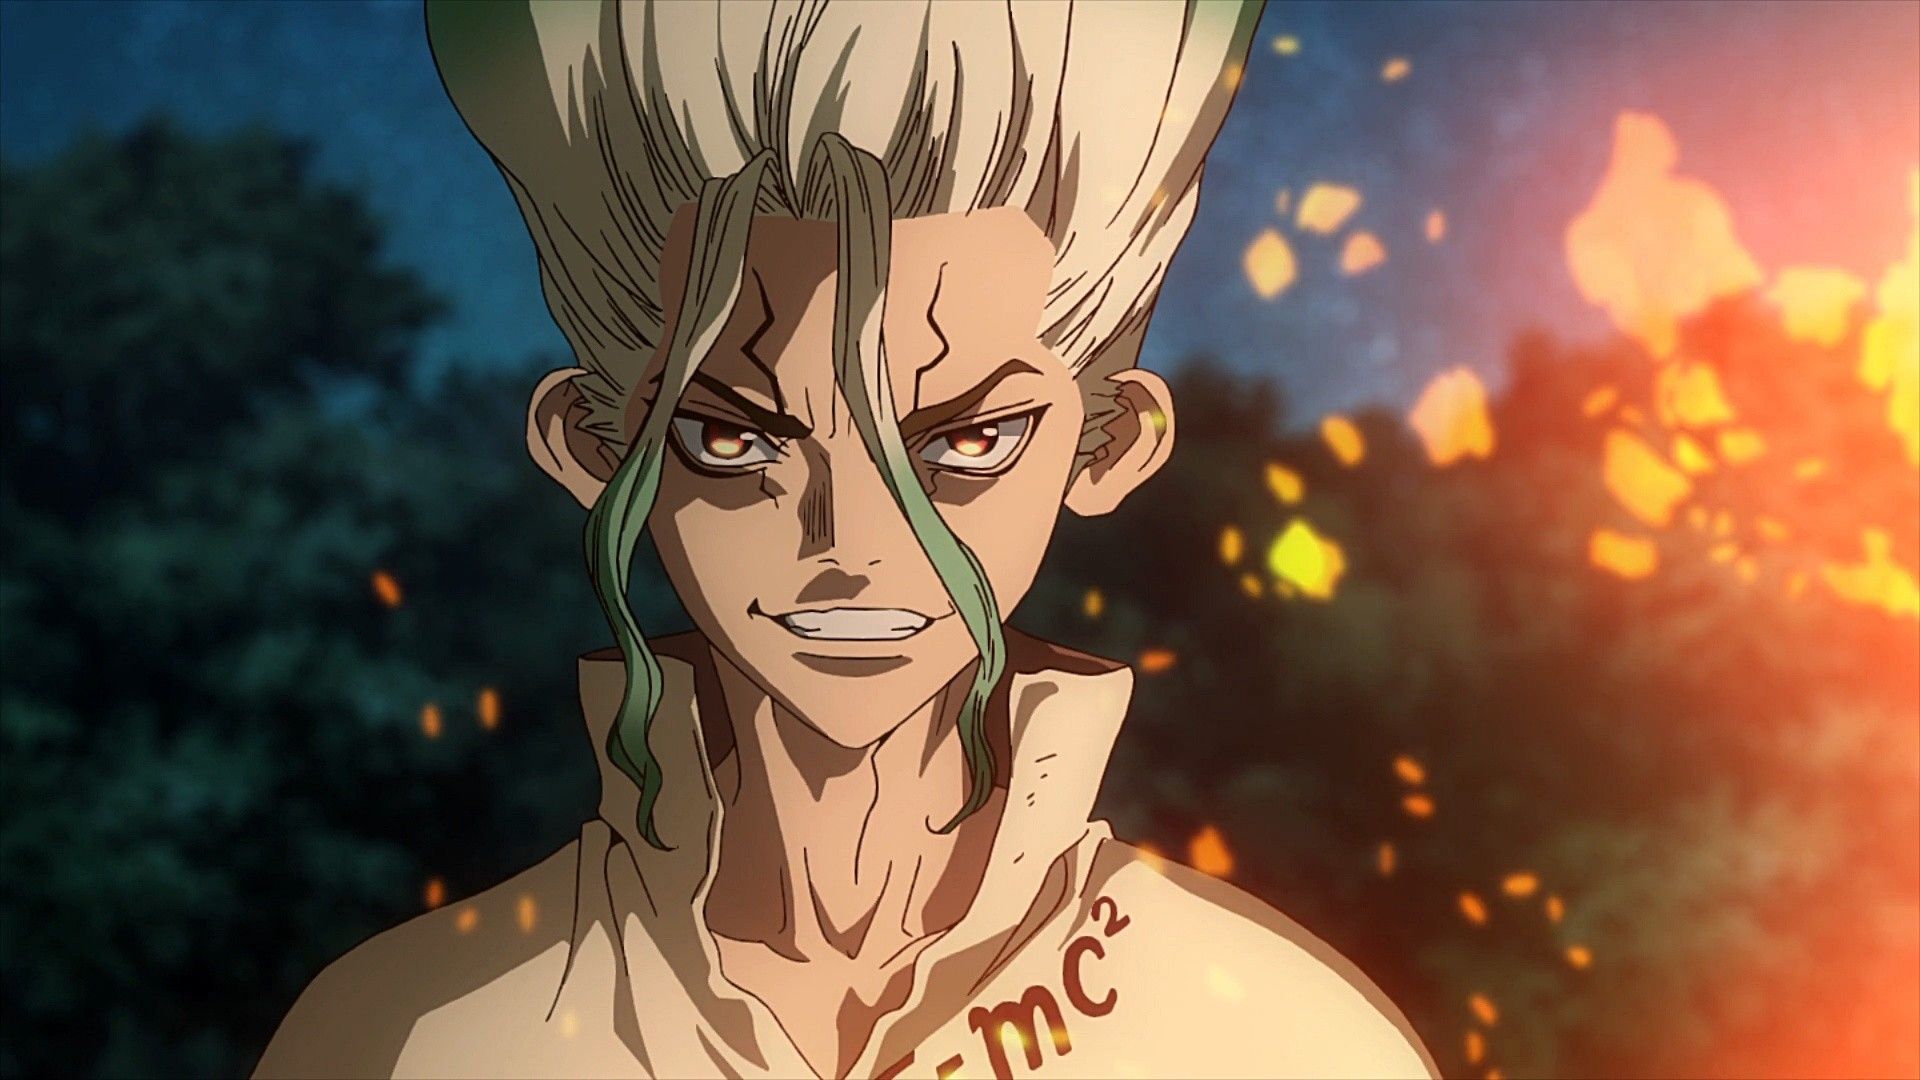 Dr. Stone 10 Hilarious Memes Only True Fans Will Understand